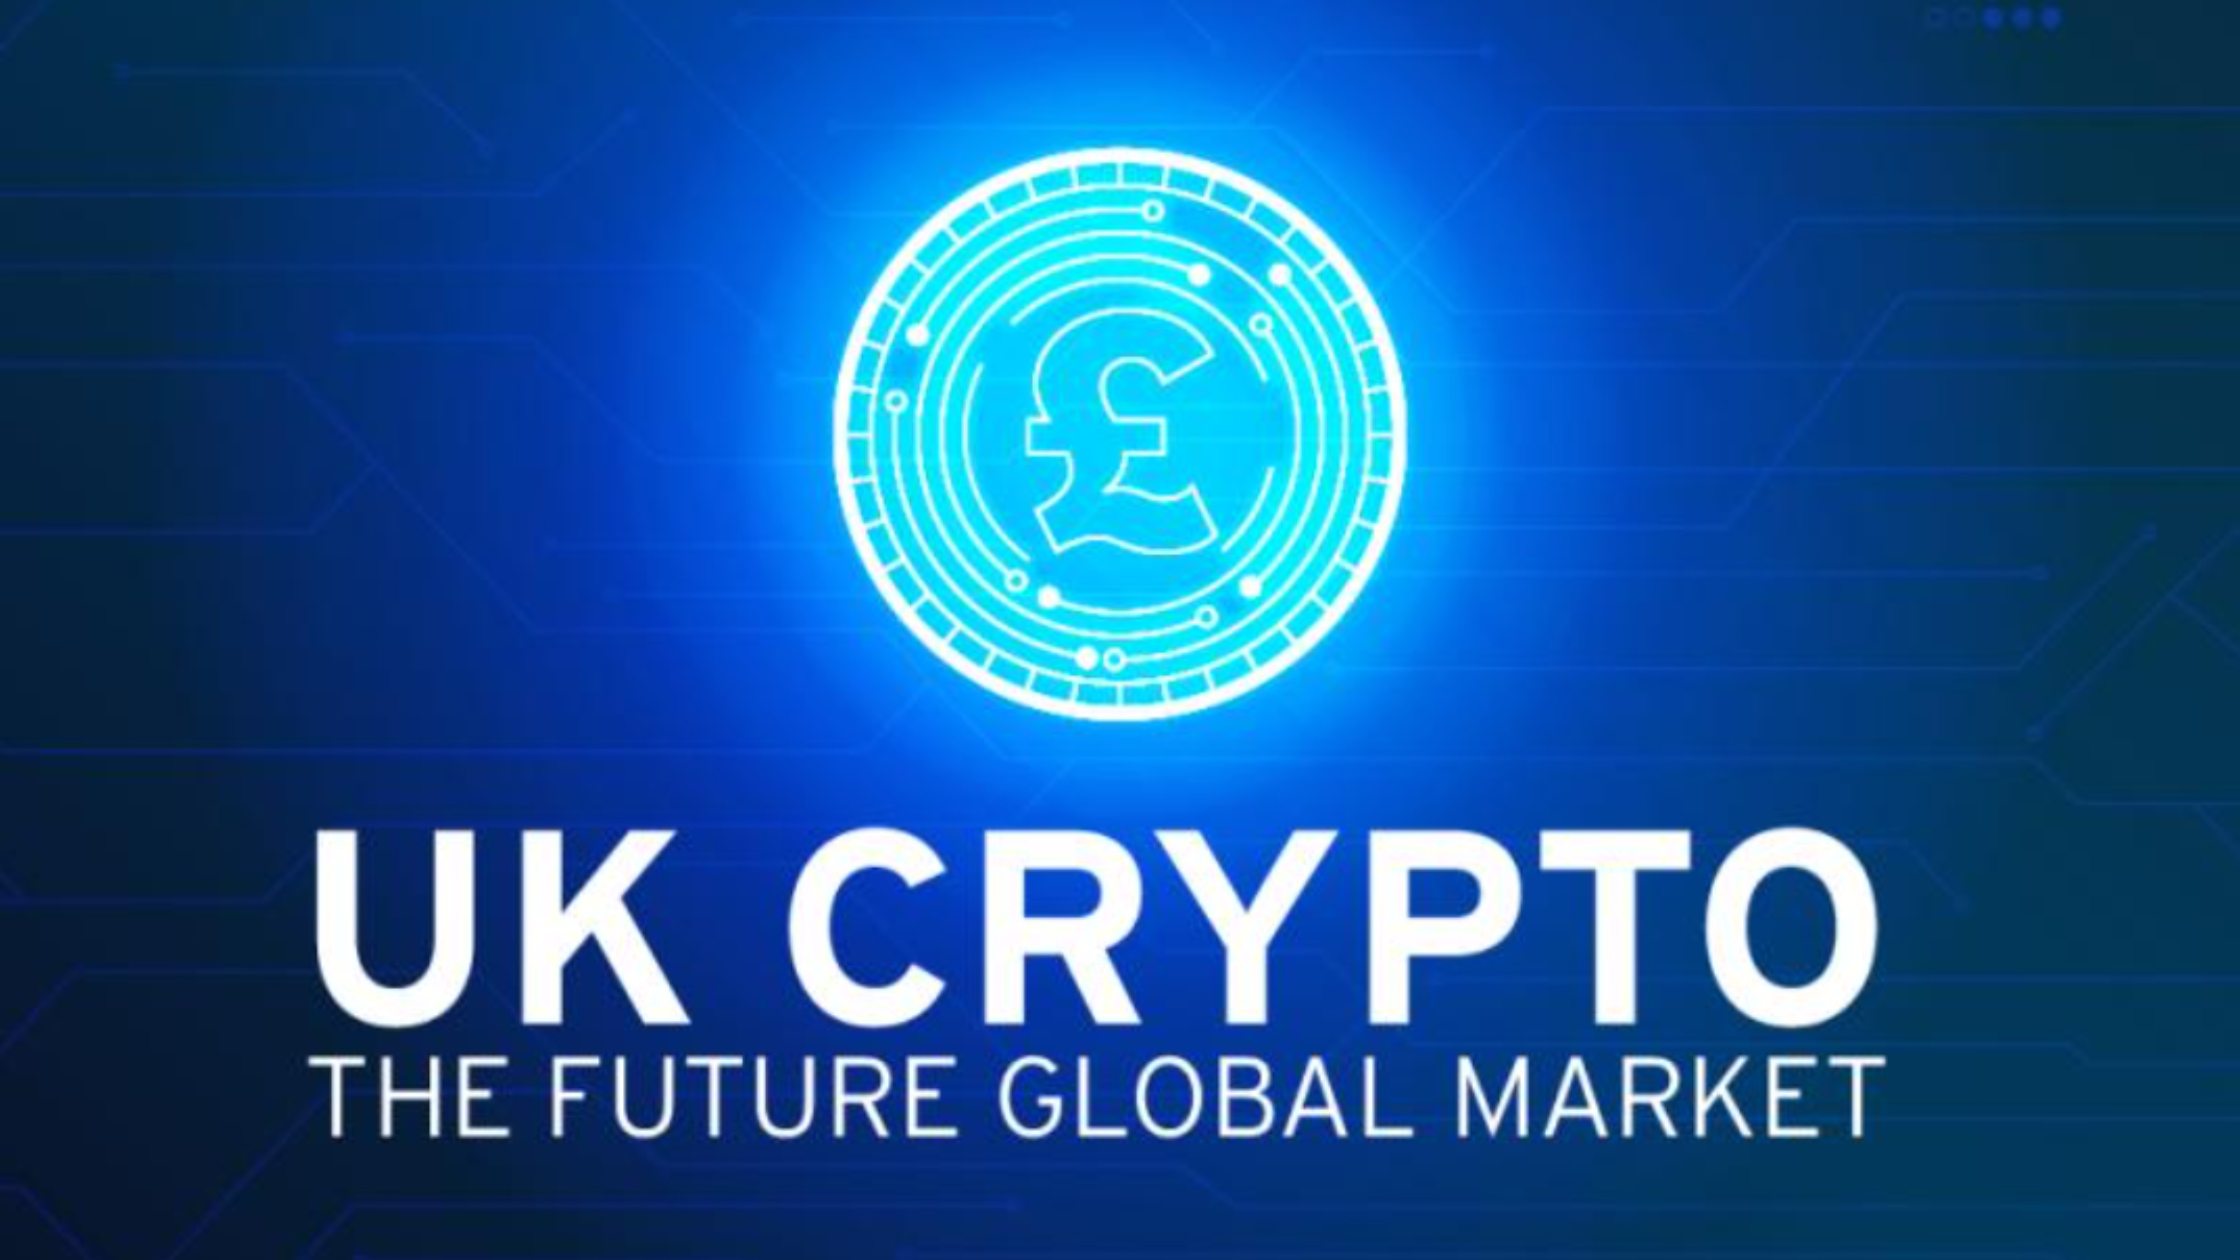 The UK set to become a Global Crypto Assets Hub